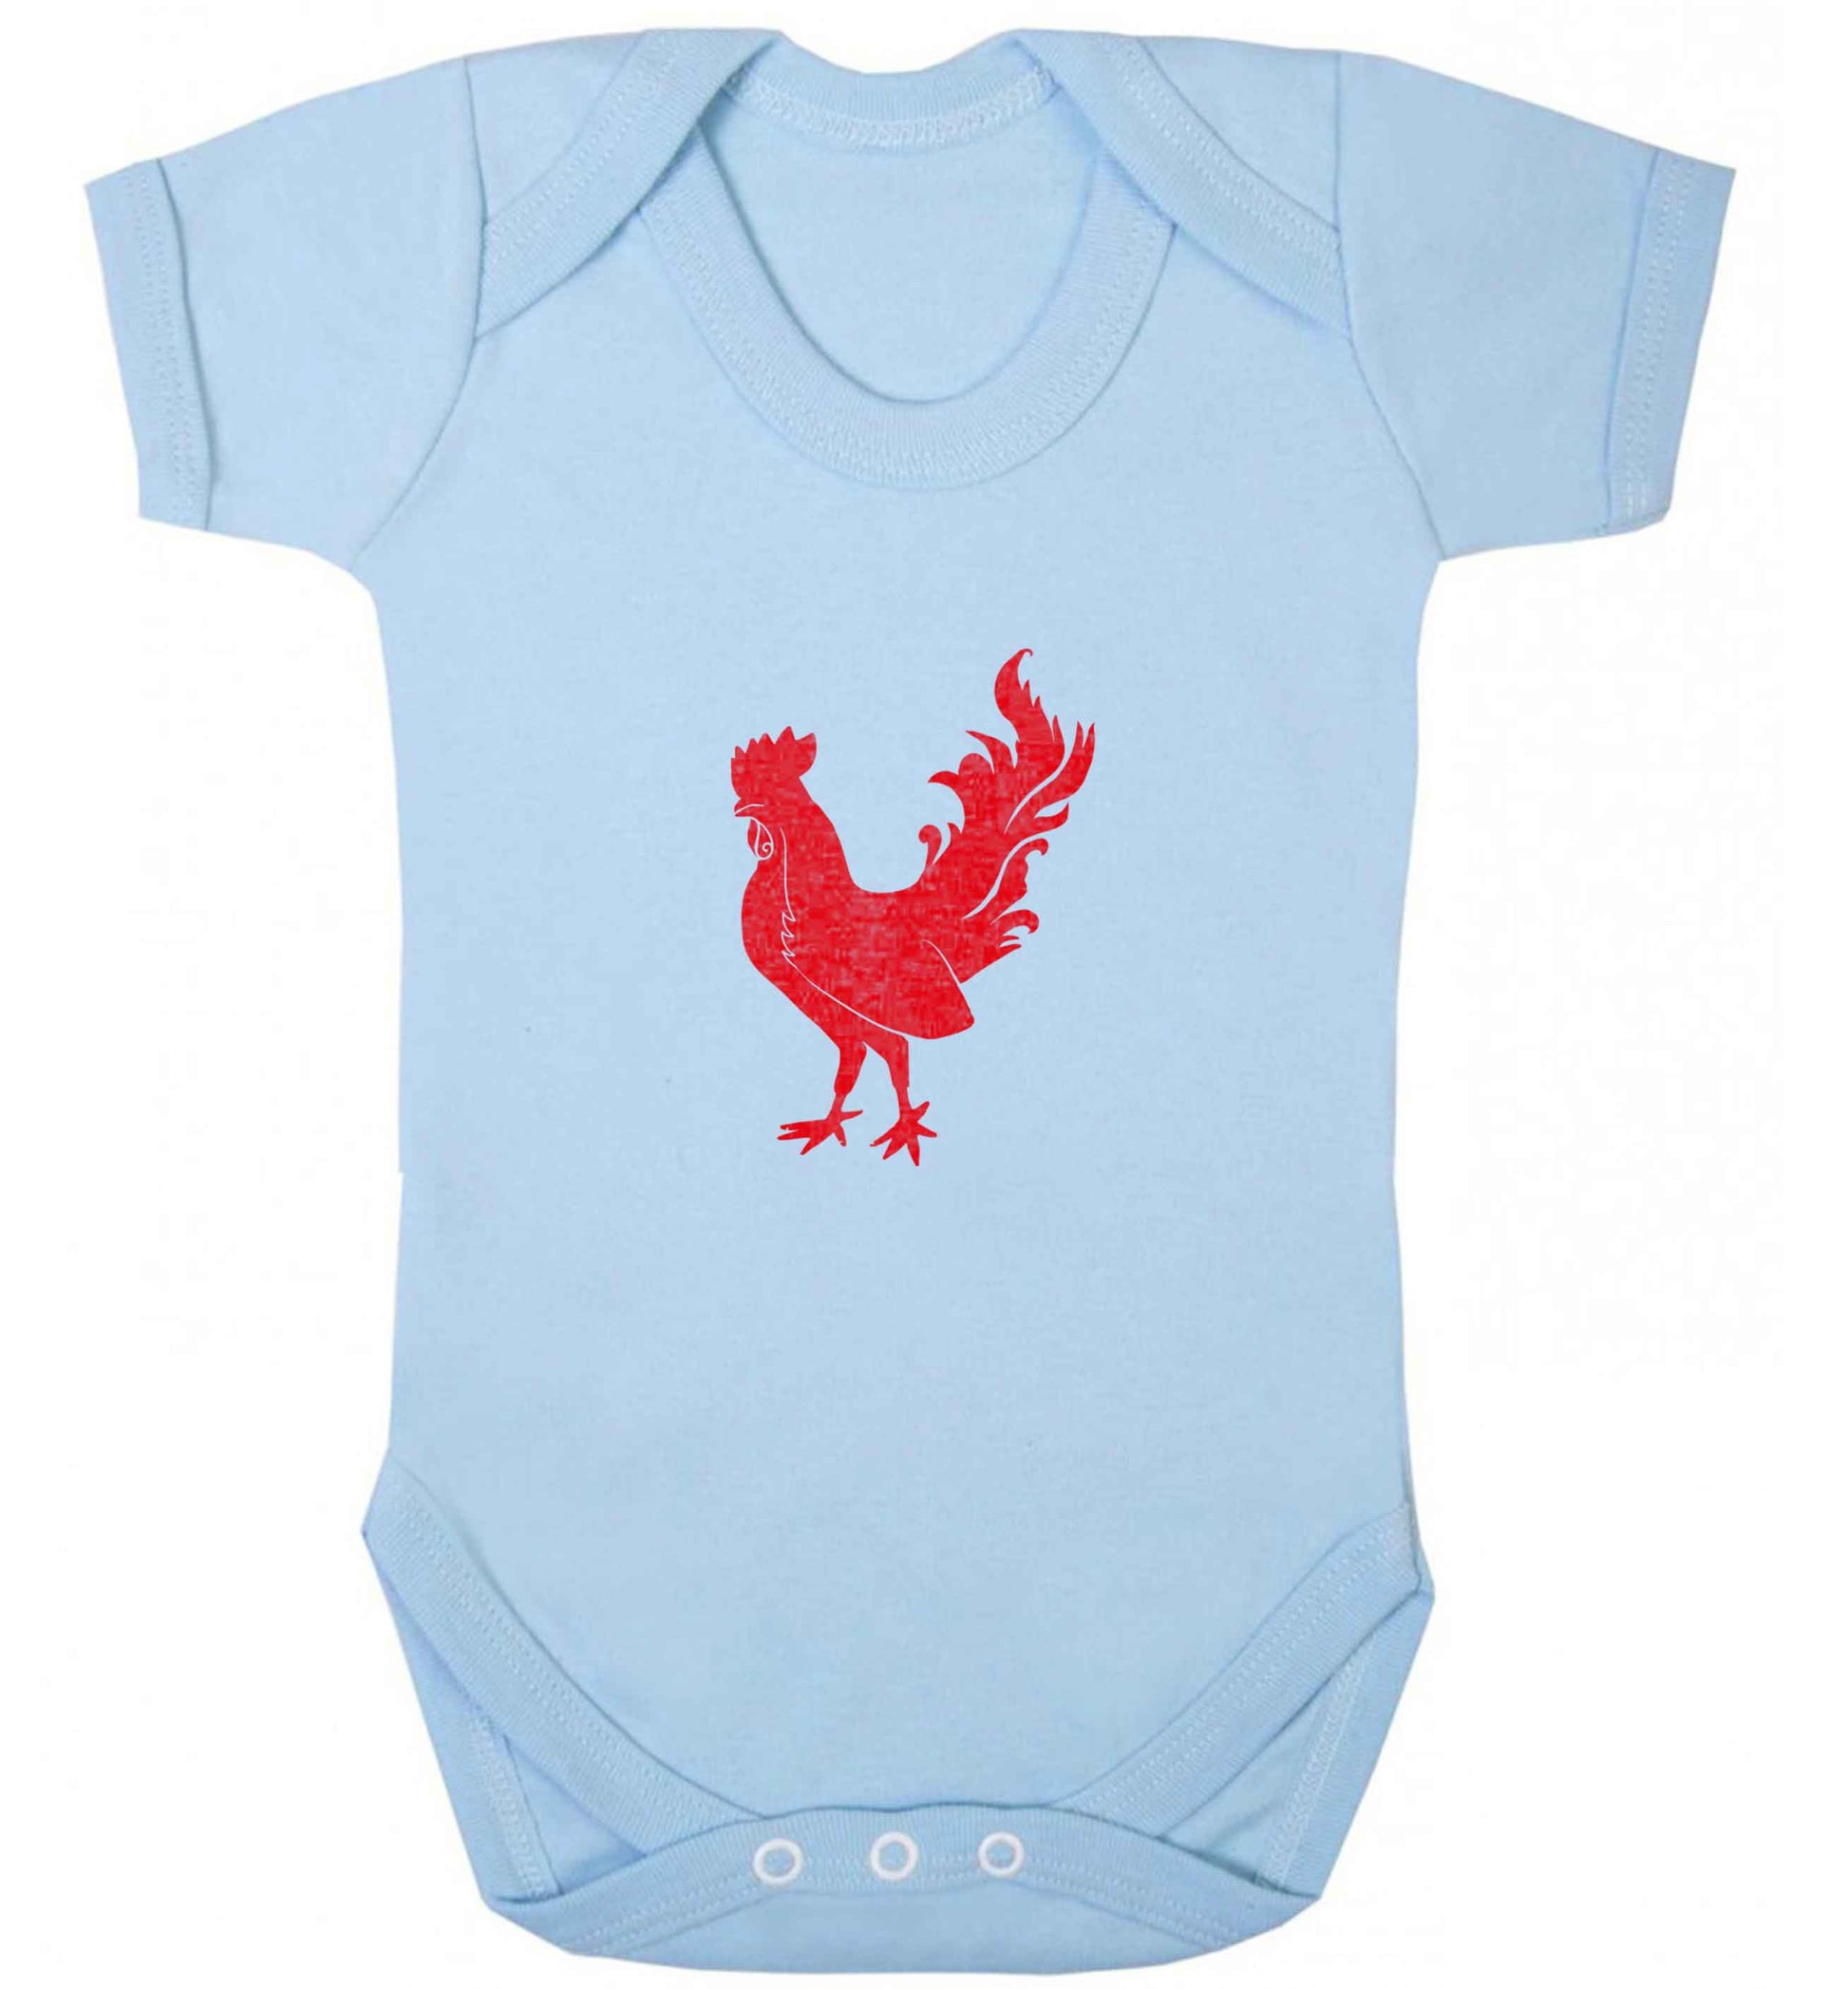 Rooster baby vest pale blue 18-24 months